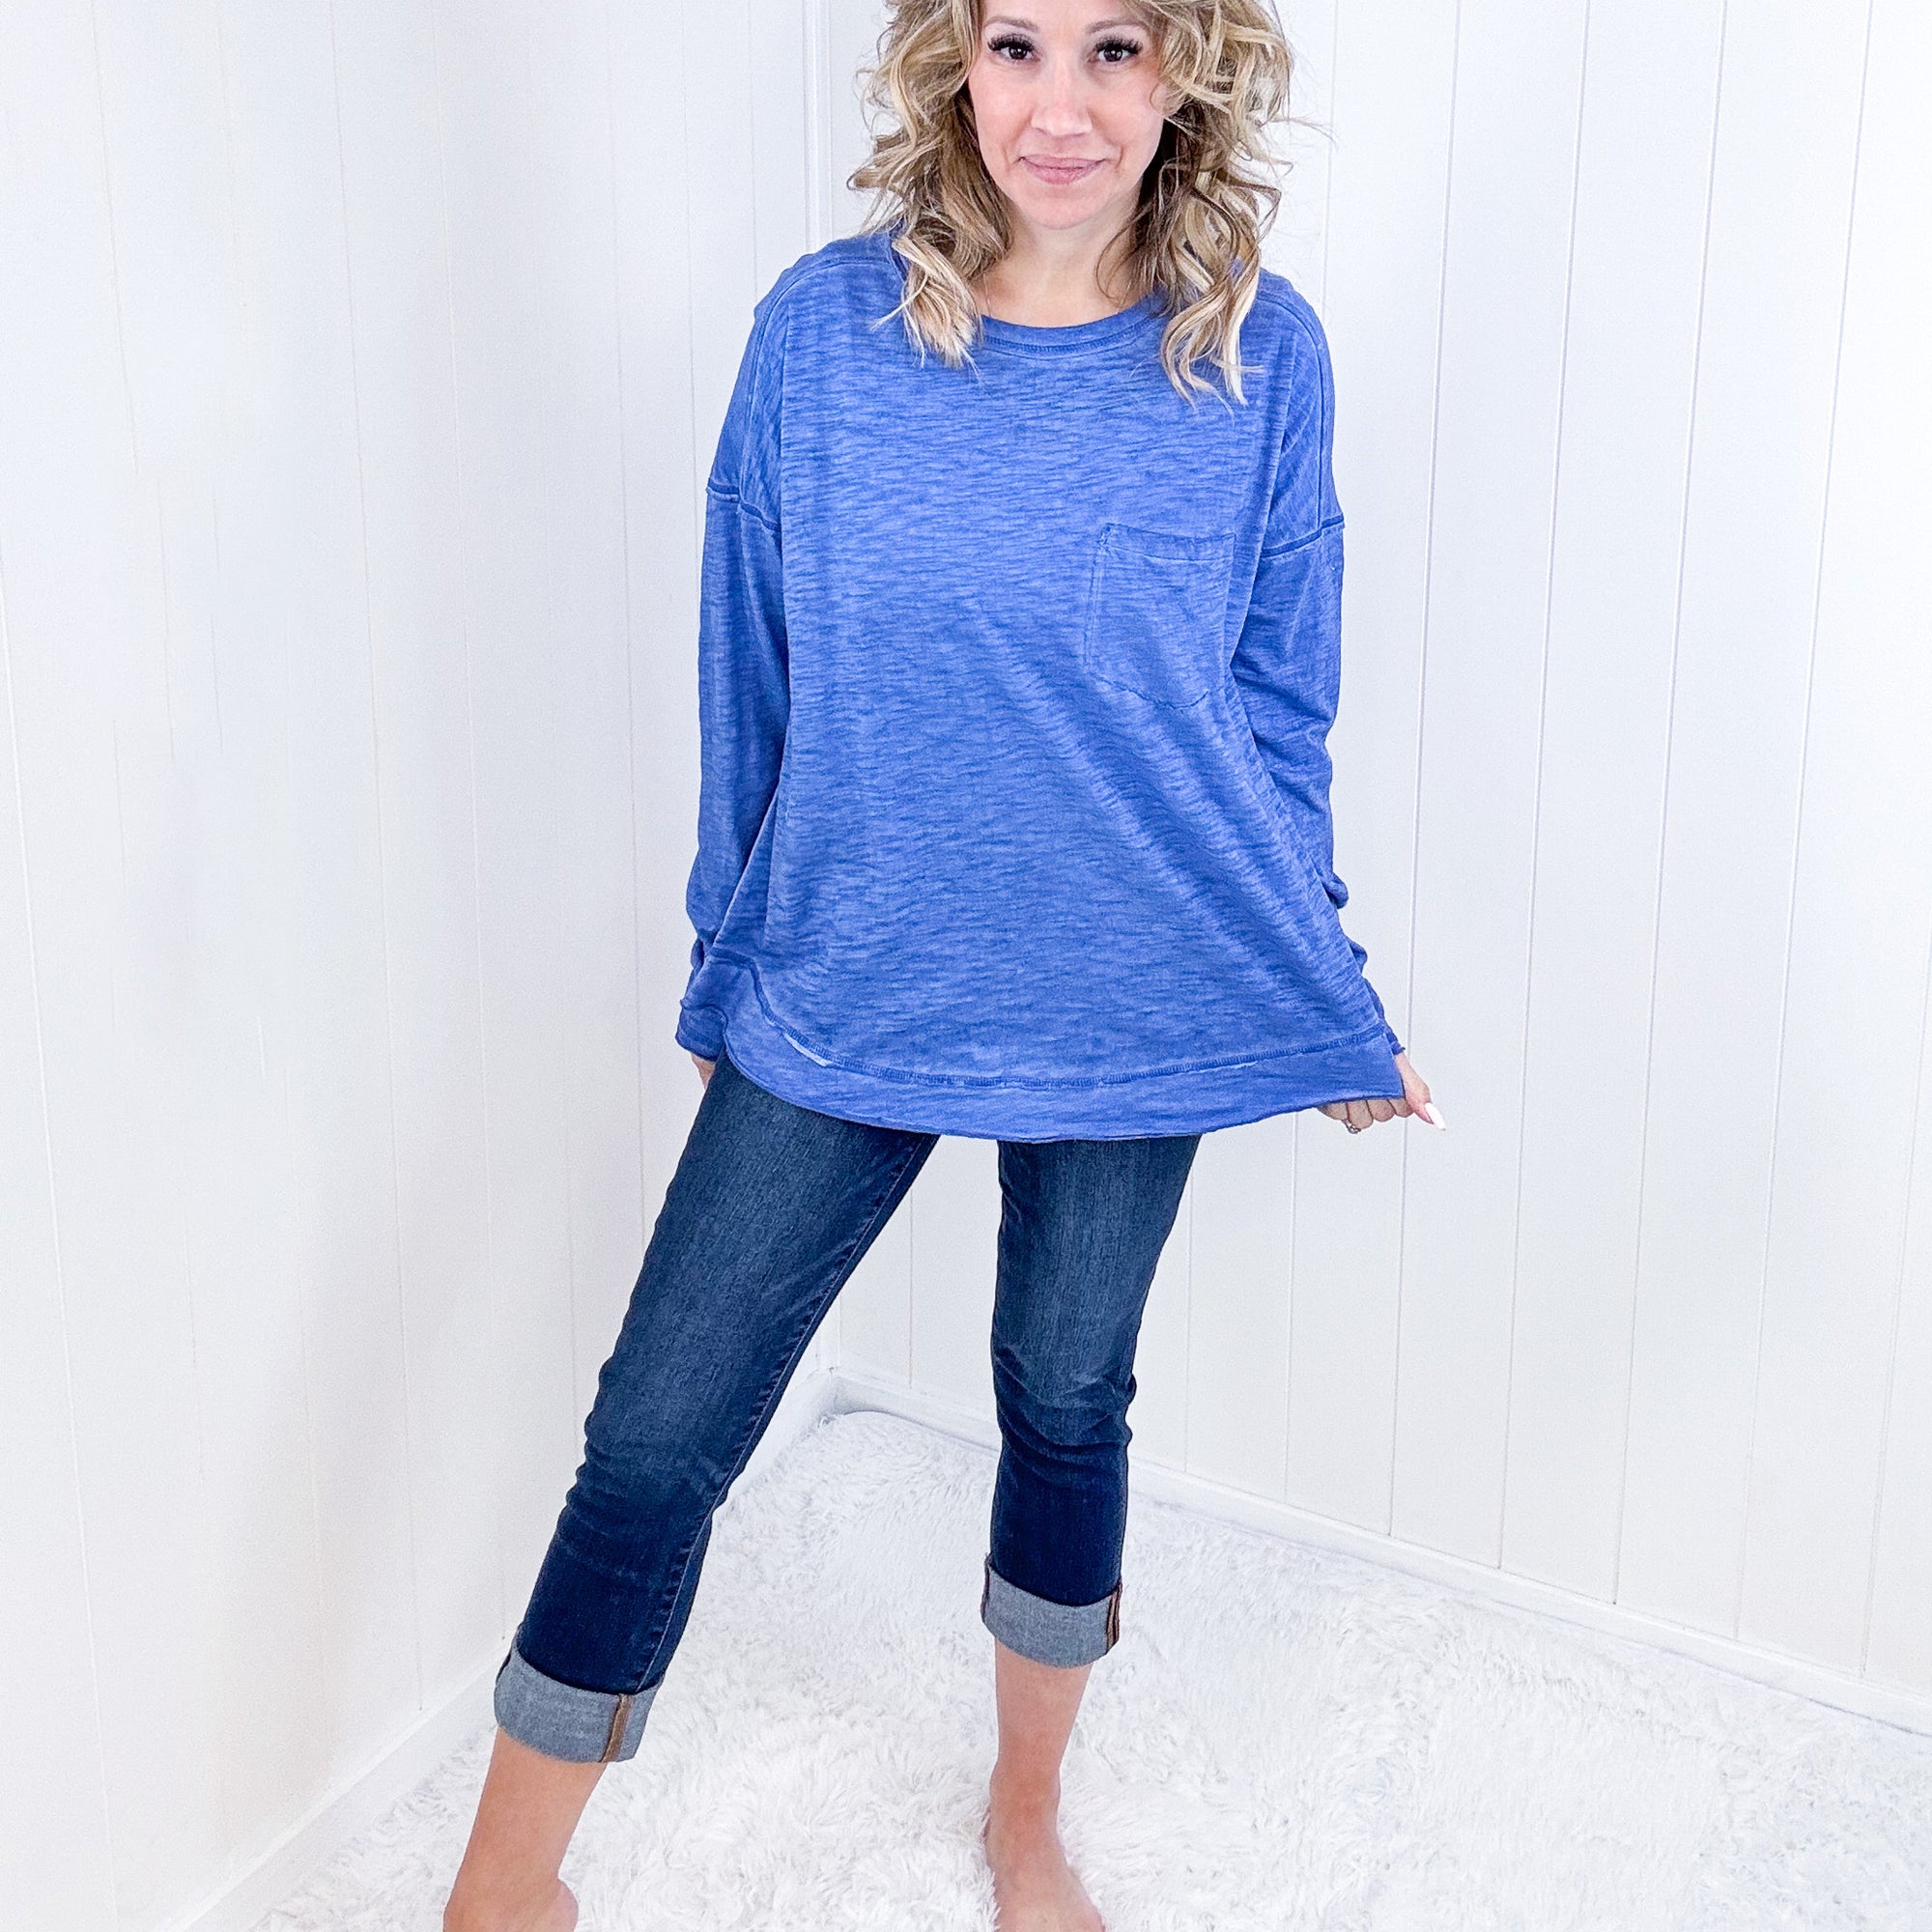 Washed Blue Gently Down the Stream Long Sleeve Top - Boujee Boutique 